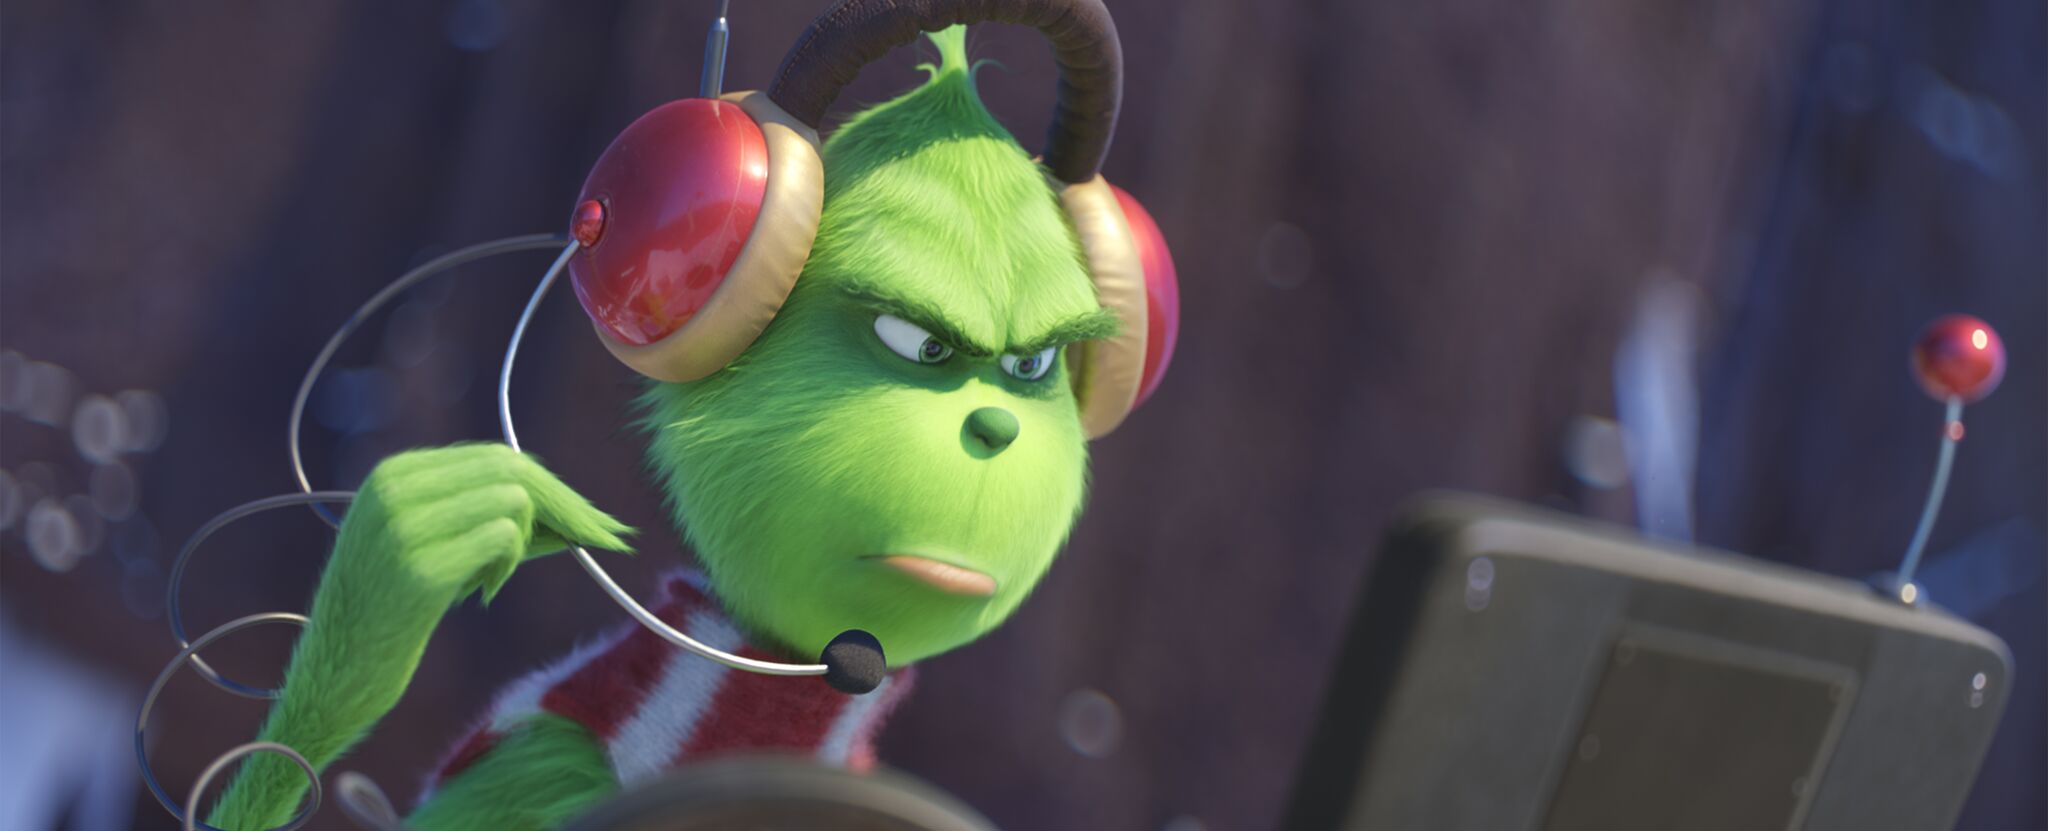 Illumination's 'The Grinch' Gets A New Trailer